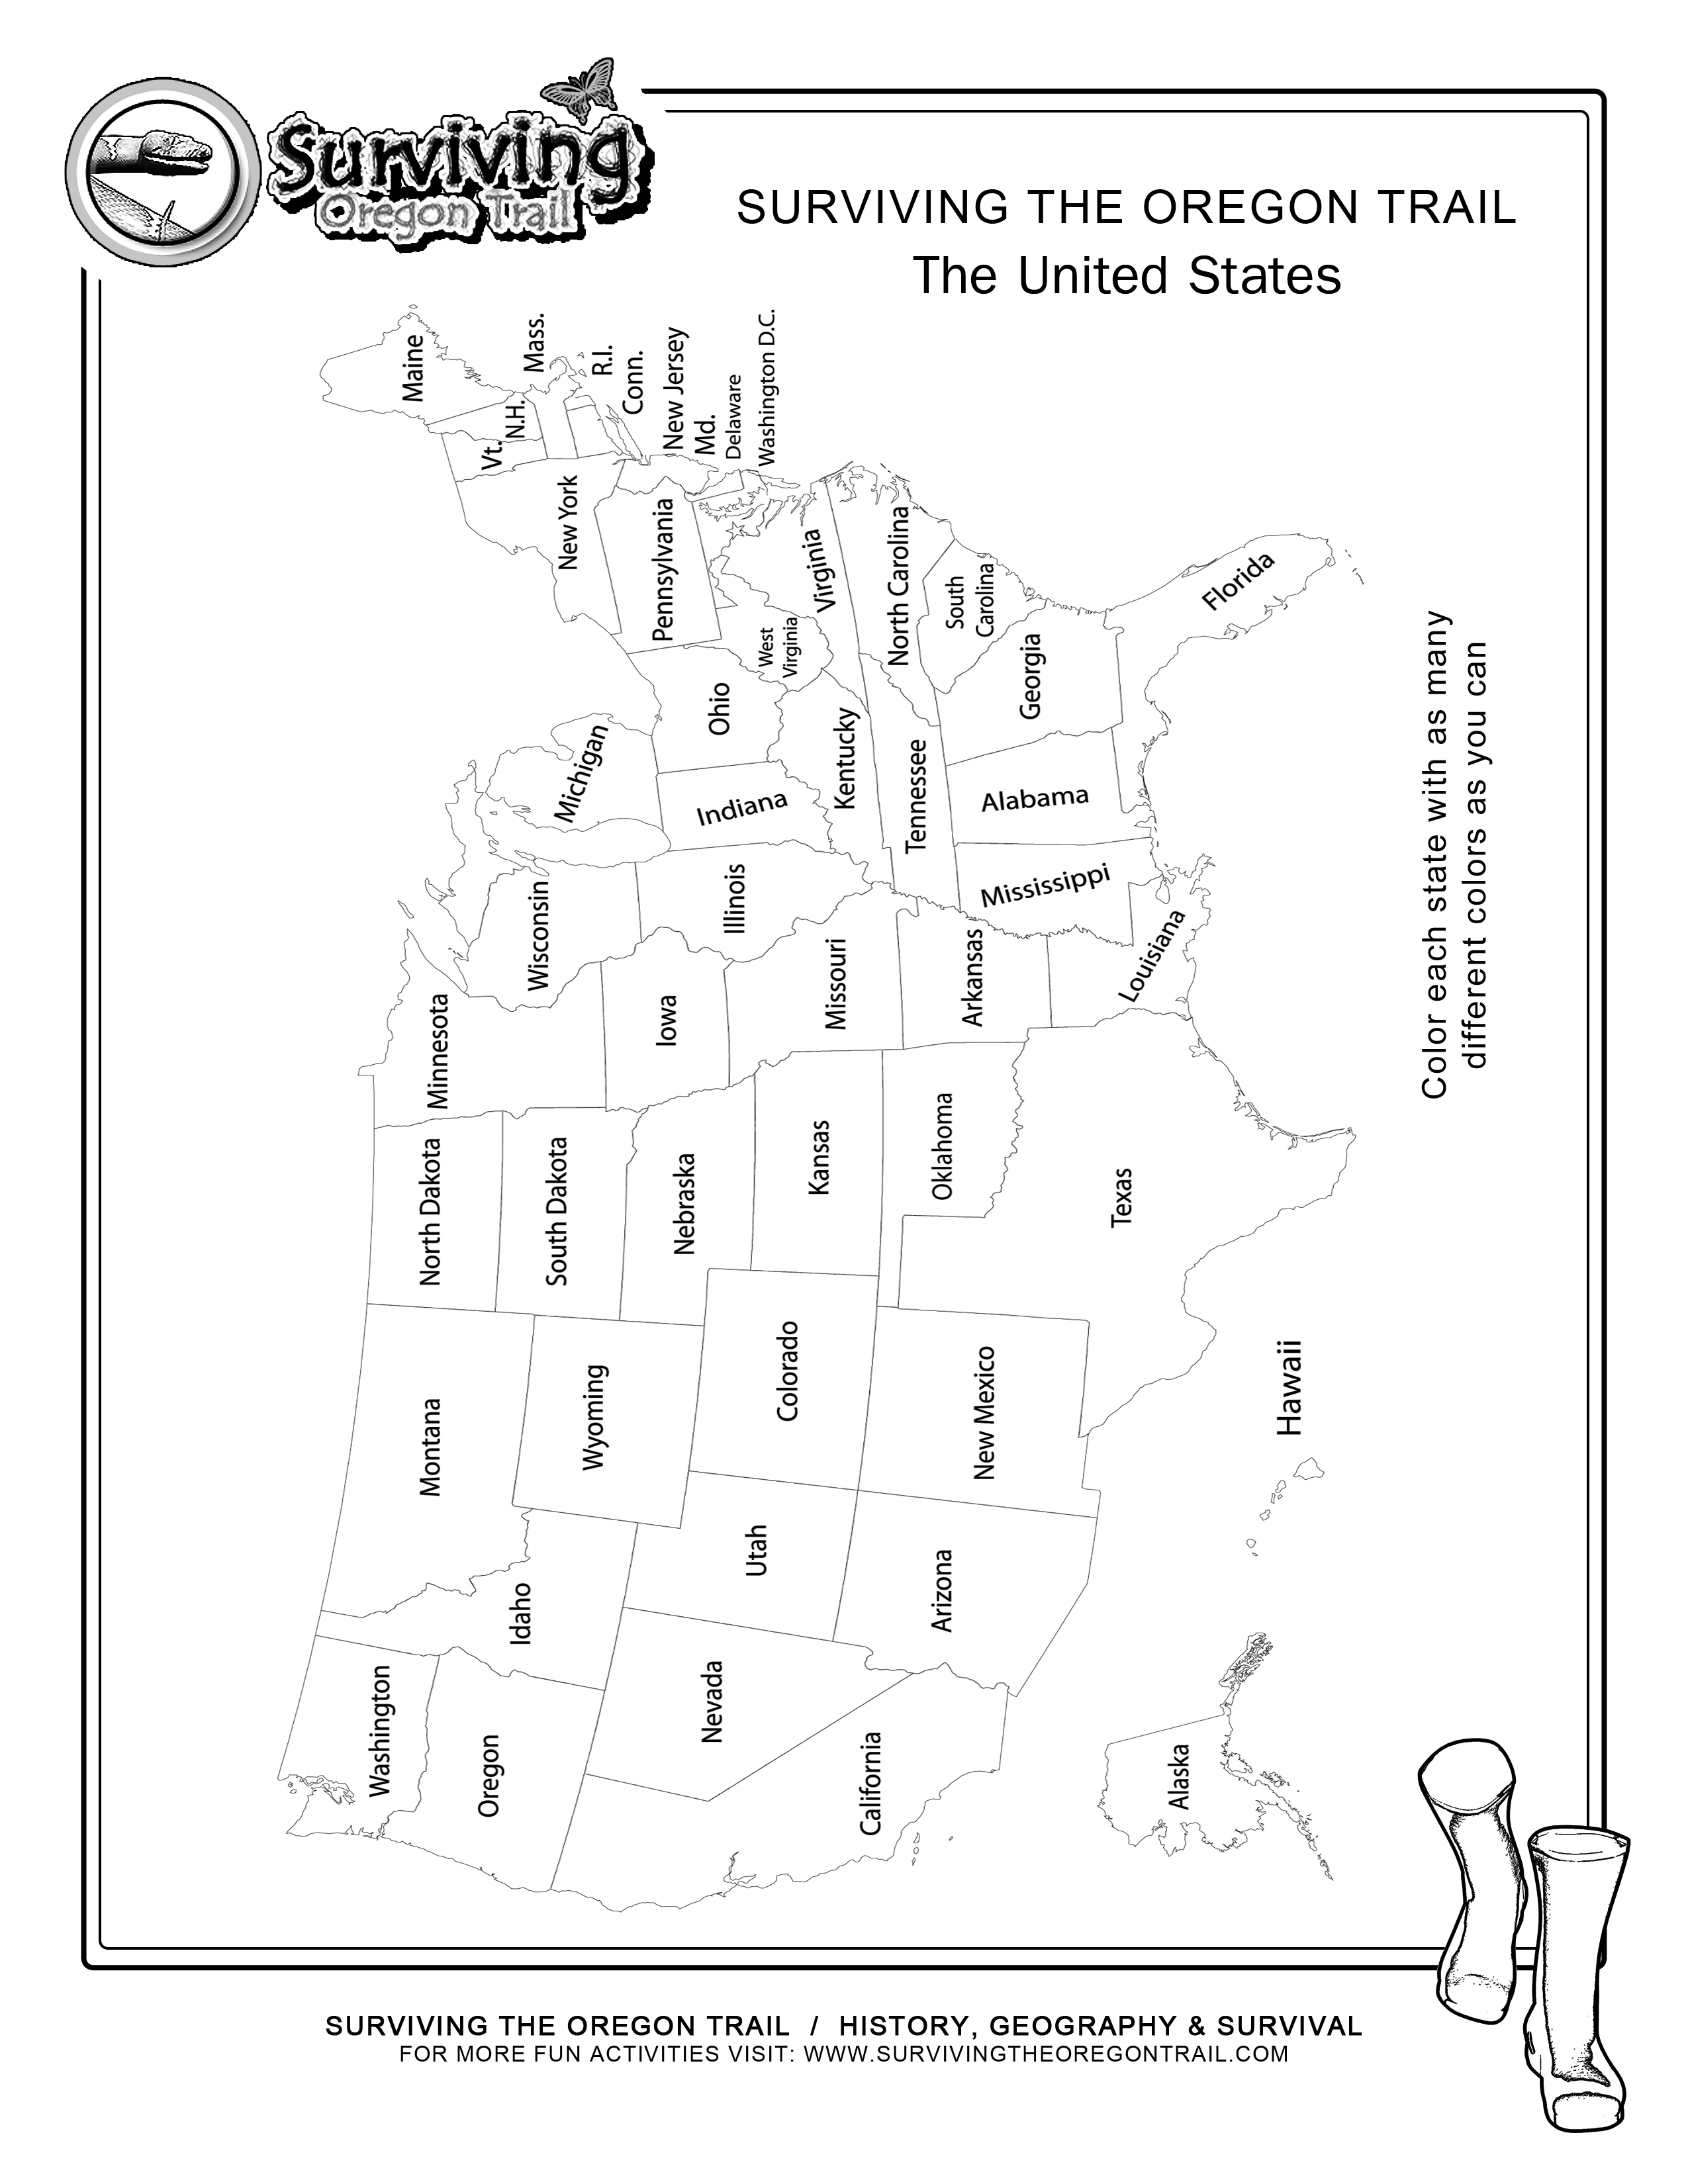 United States Map Coloring Page Image